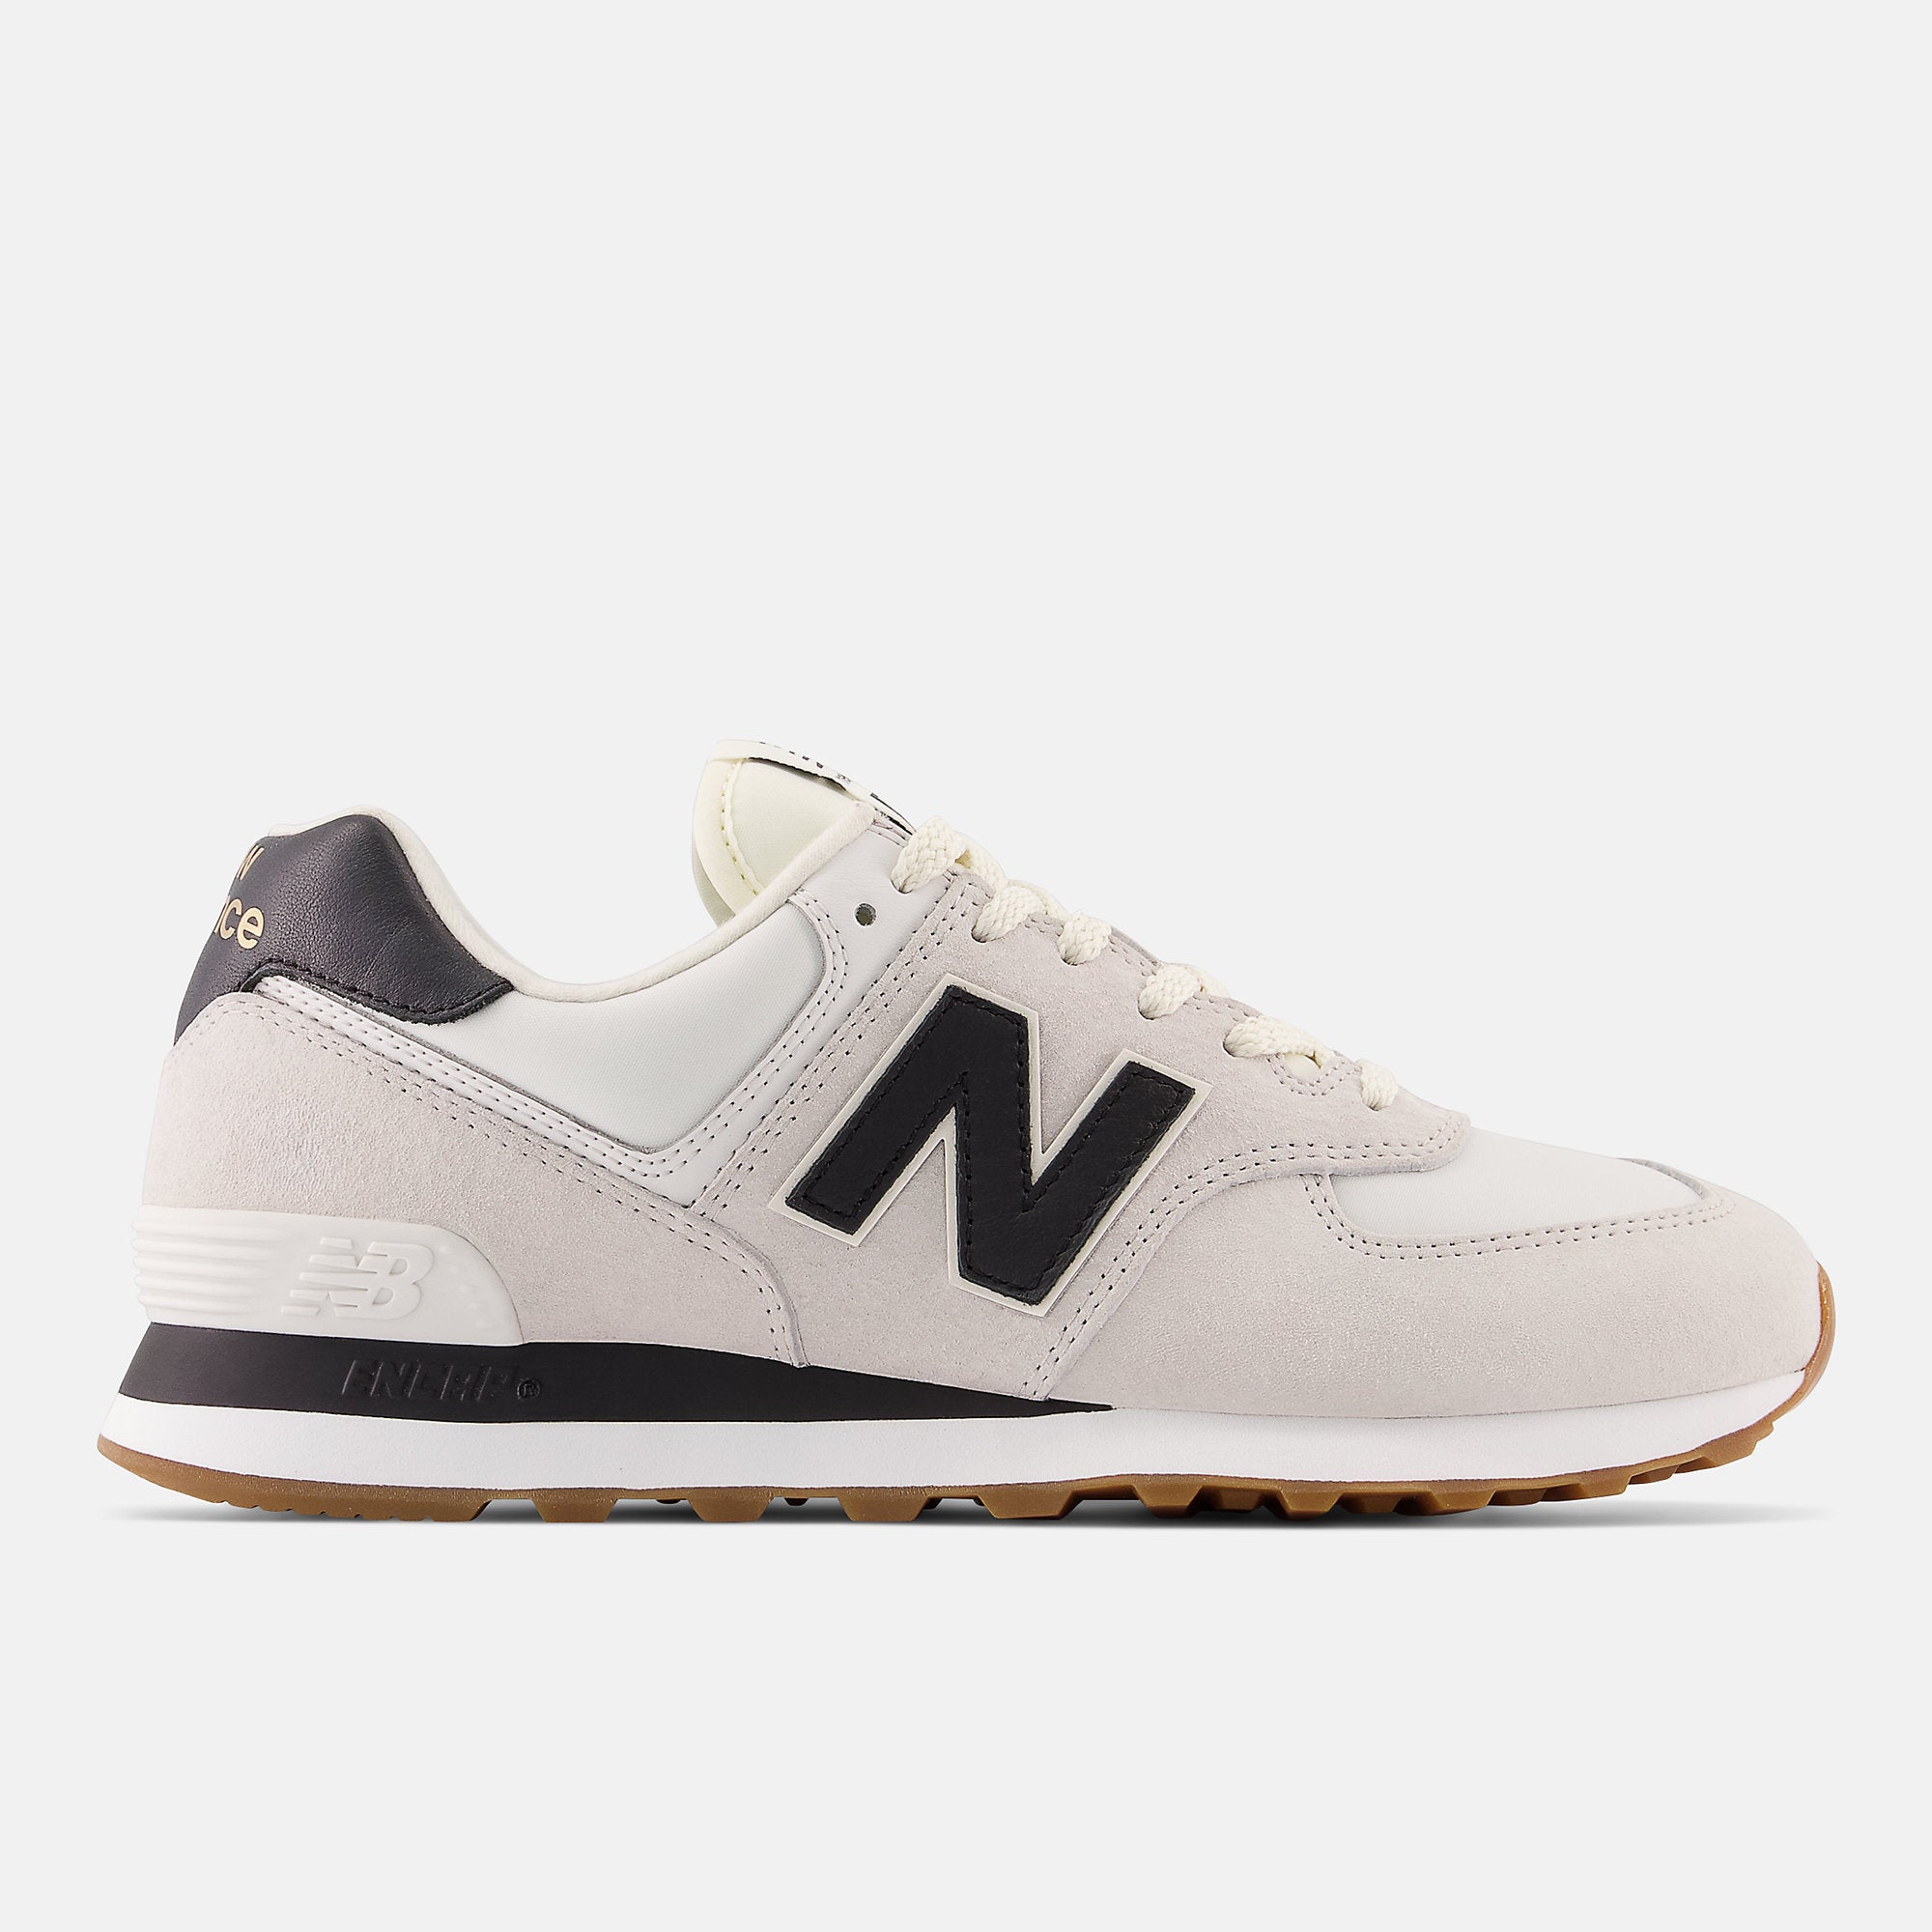 New Balance Mens 574 Fashion Trainers - White / Grey - The Foot Factory